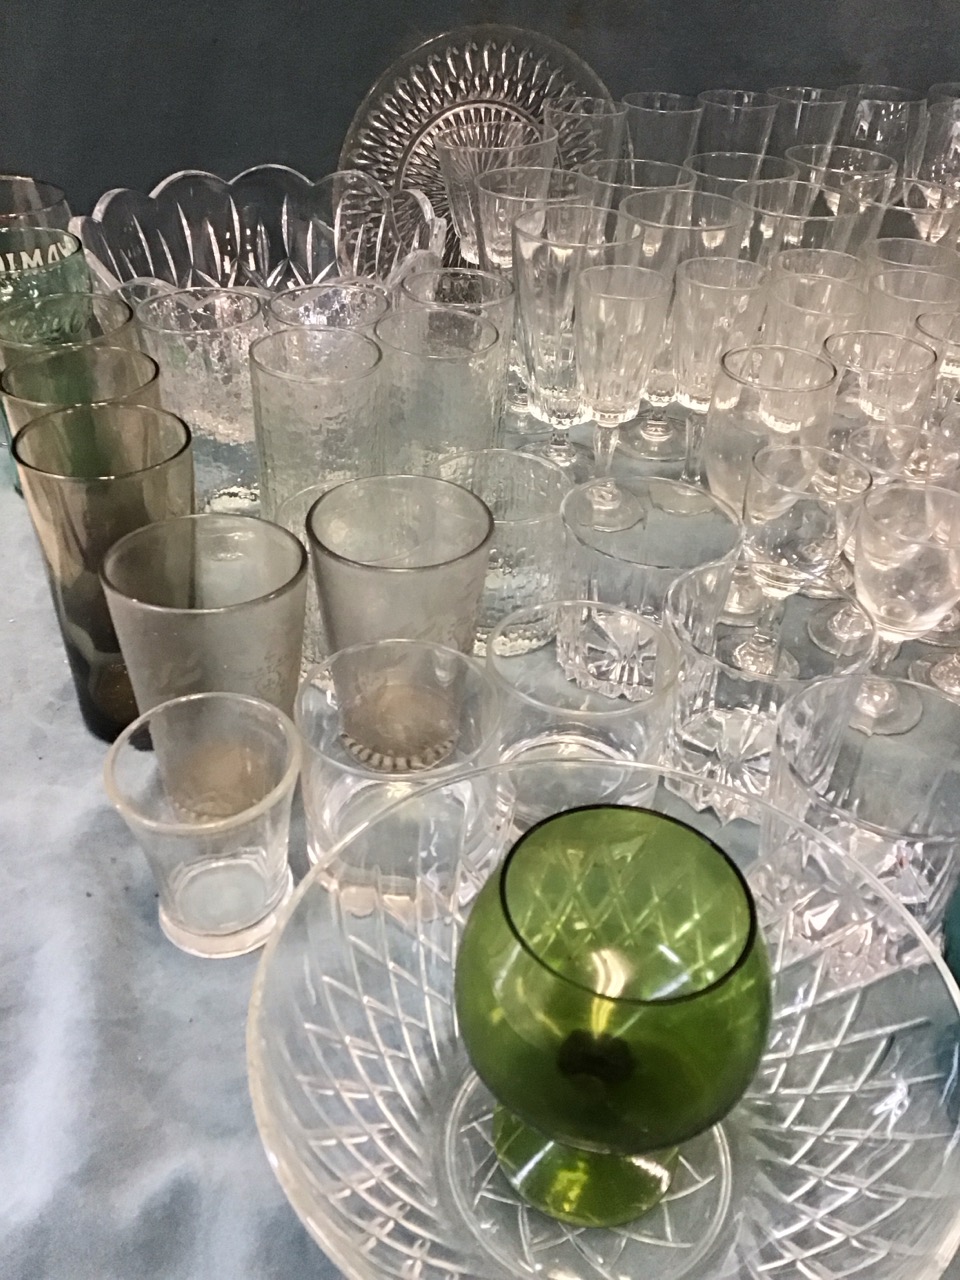 Miscellaneous drinking glasses including wine, sherry, tumblers, brandy balloons, highballs, beer, - Image 3 of 3